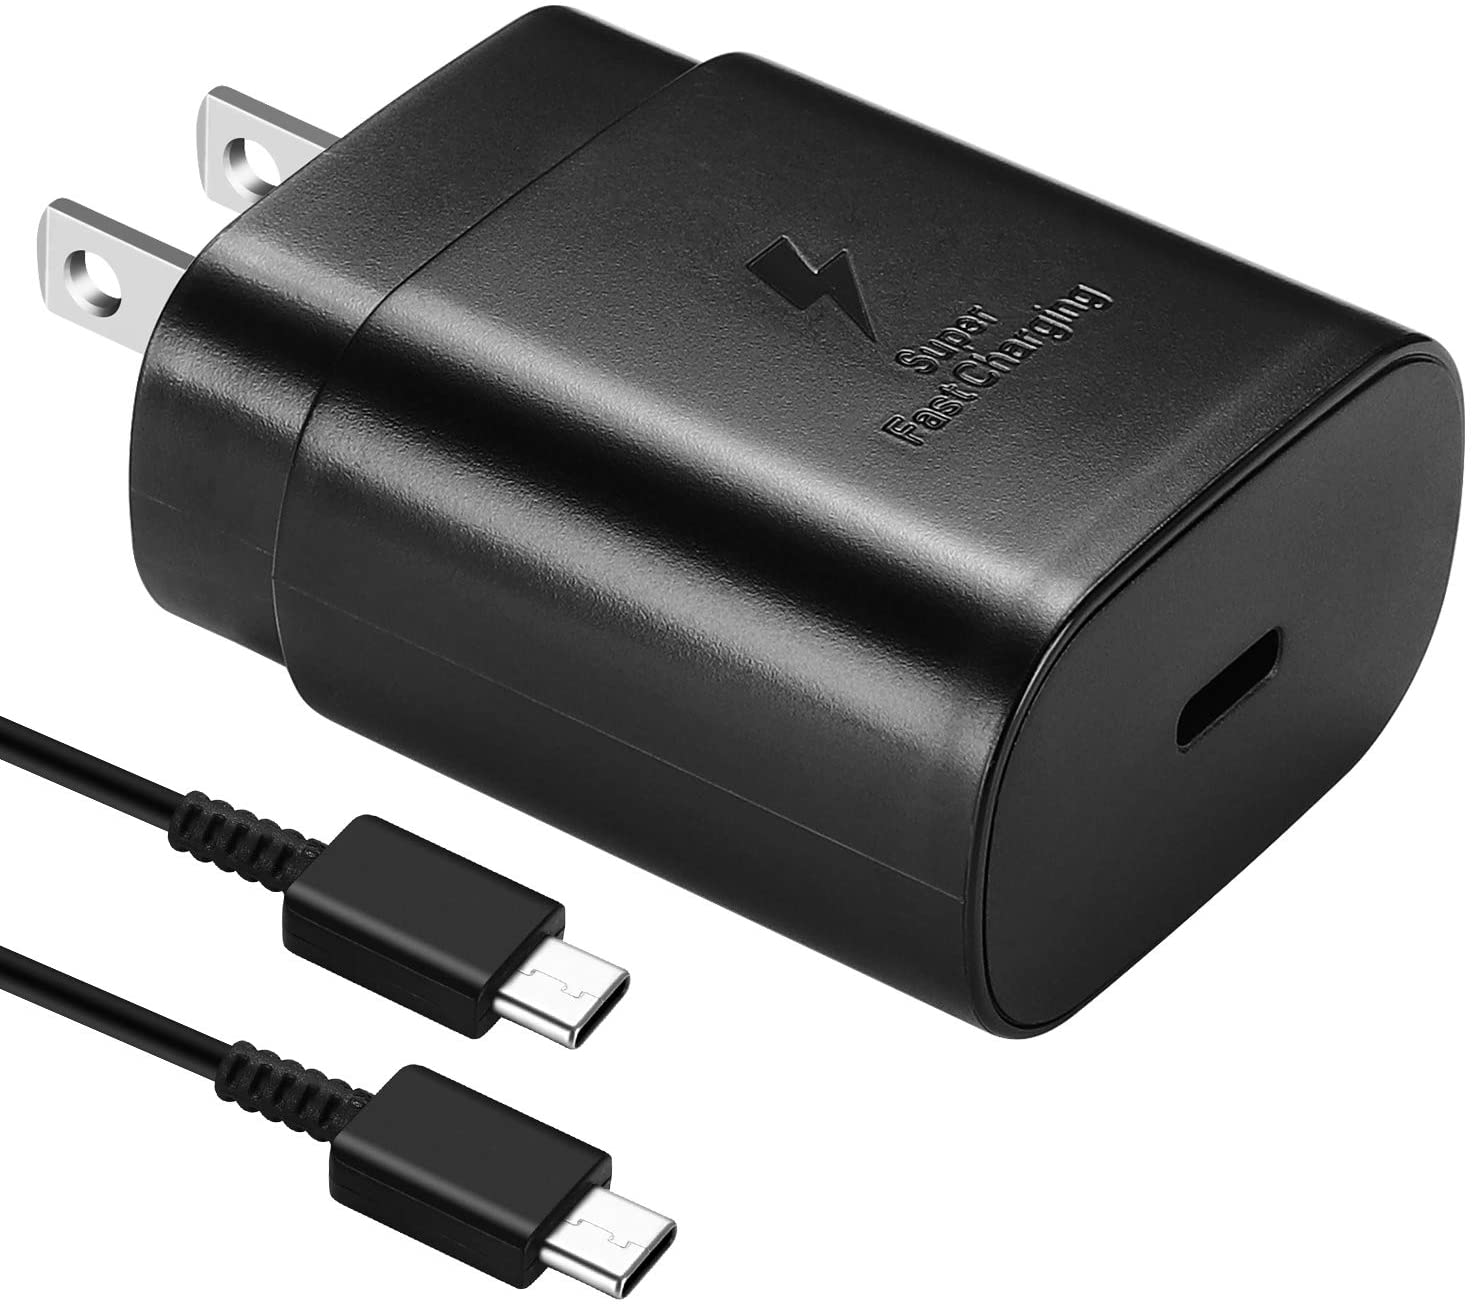 Samsung OEM Adaptive Super Fast Charger for Samsung Galaxy S20 S20+ Plus S20 Ultra S21 S21+ Ultra Note10 Note20 Real 25W USB Super Fast Wall Charger Adapter + 3FT USB-C Type C Cable Cord Kit - image 1 of 5